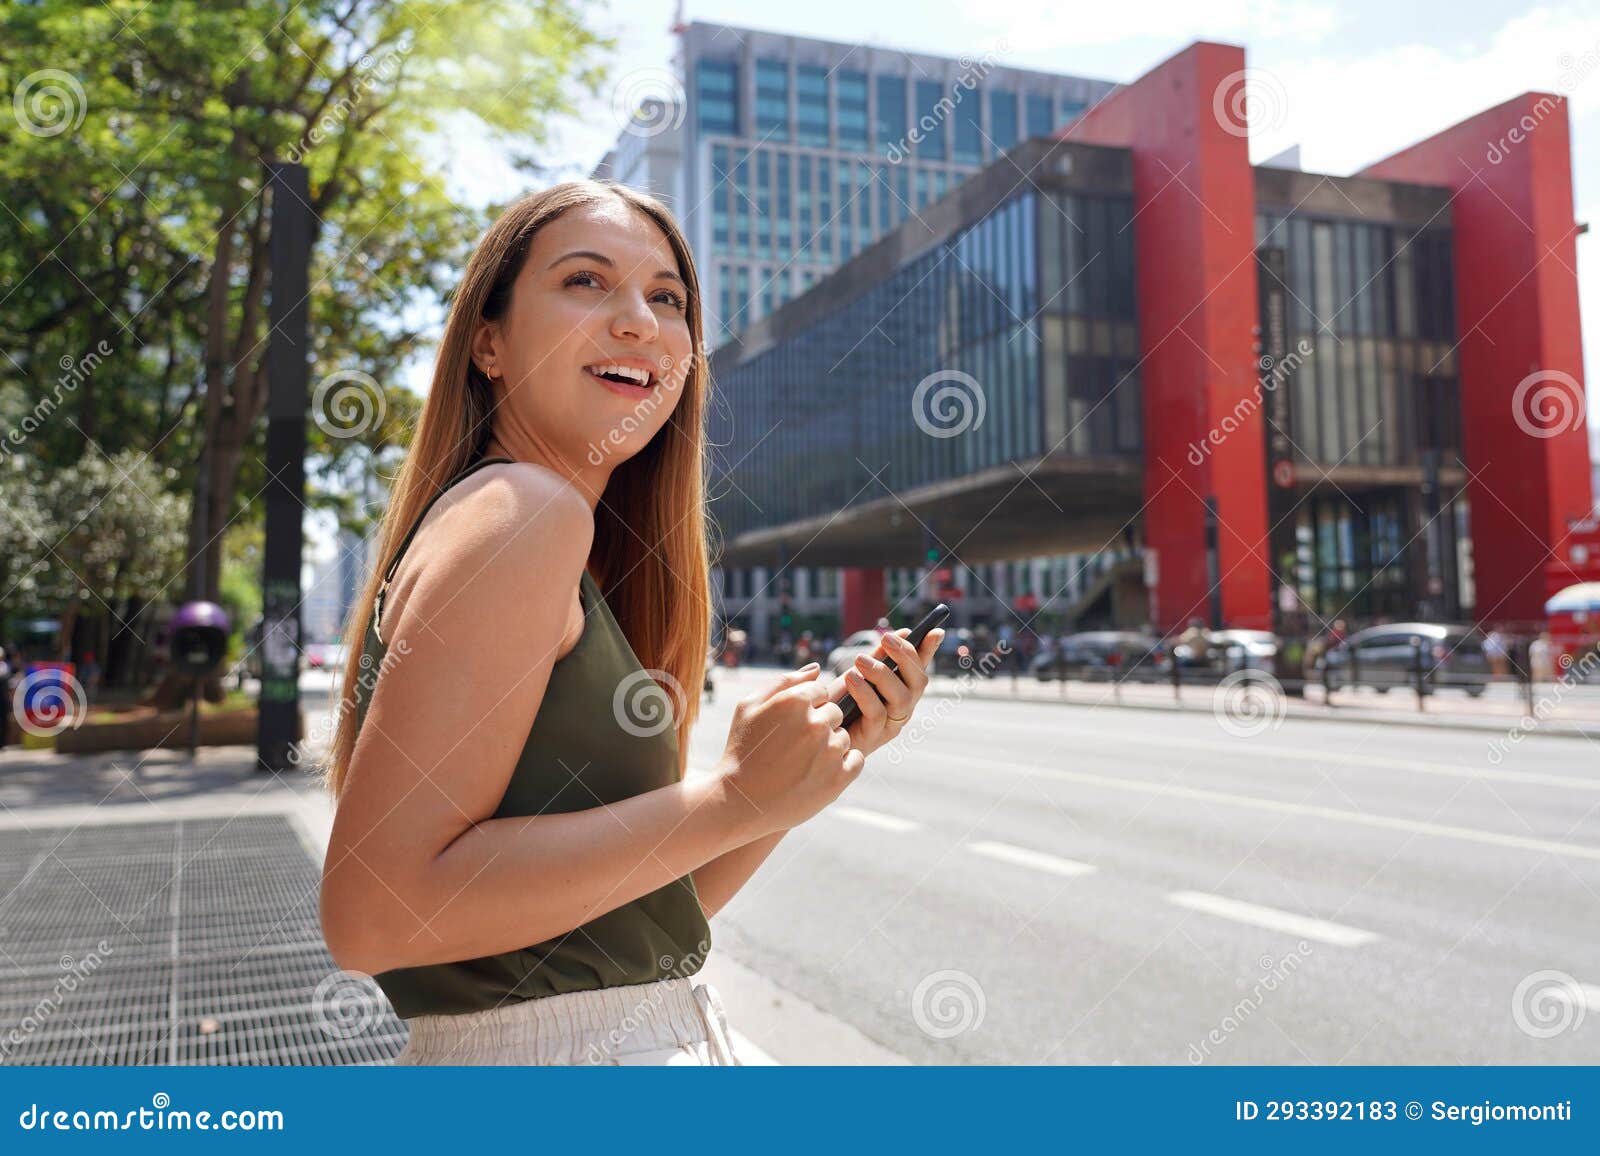 smiling brazilian woman hail a vehicle using mobile app waiting for taxi or uber on paulista avenue, sao paulo, brazil